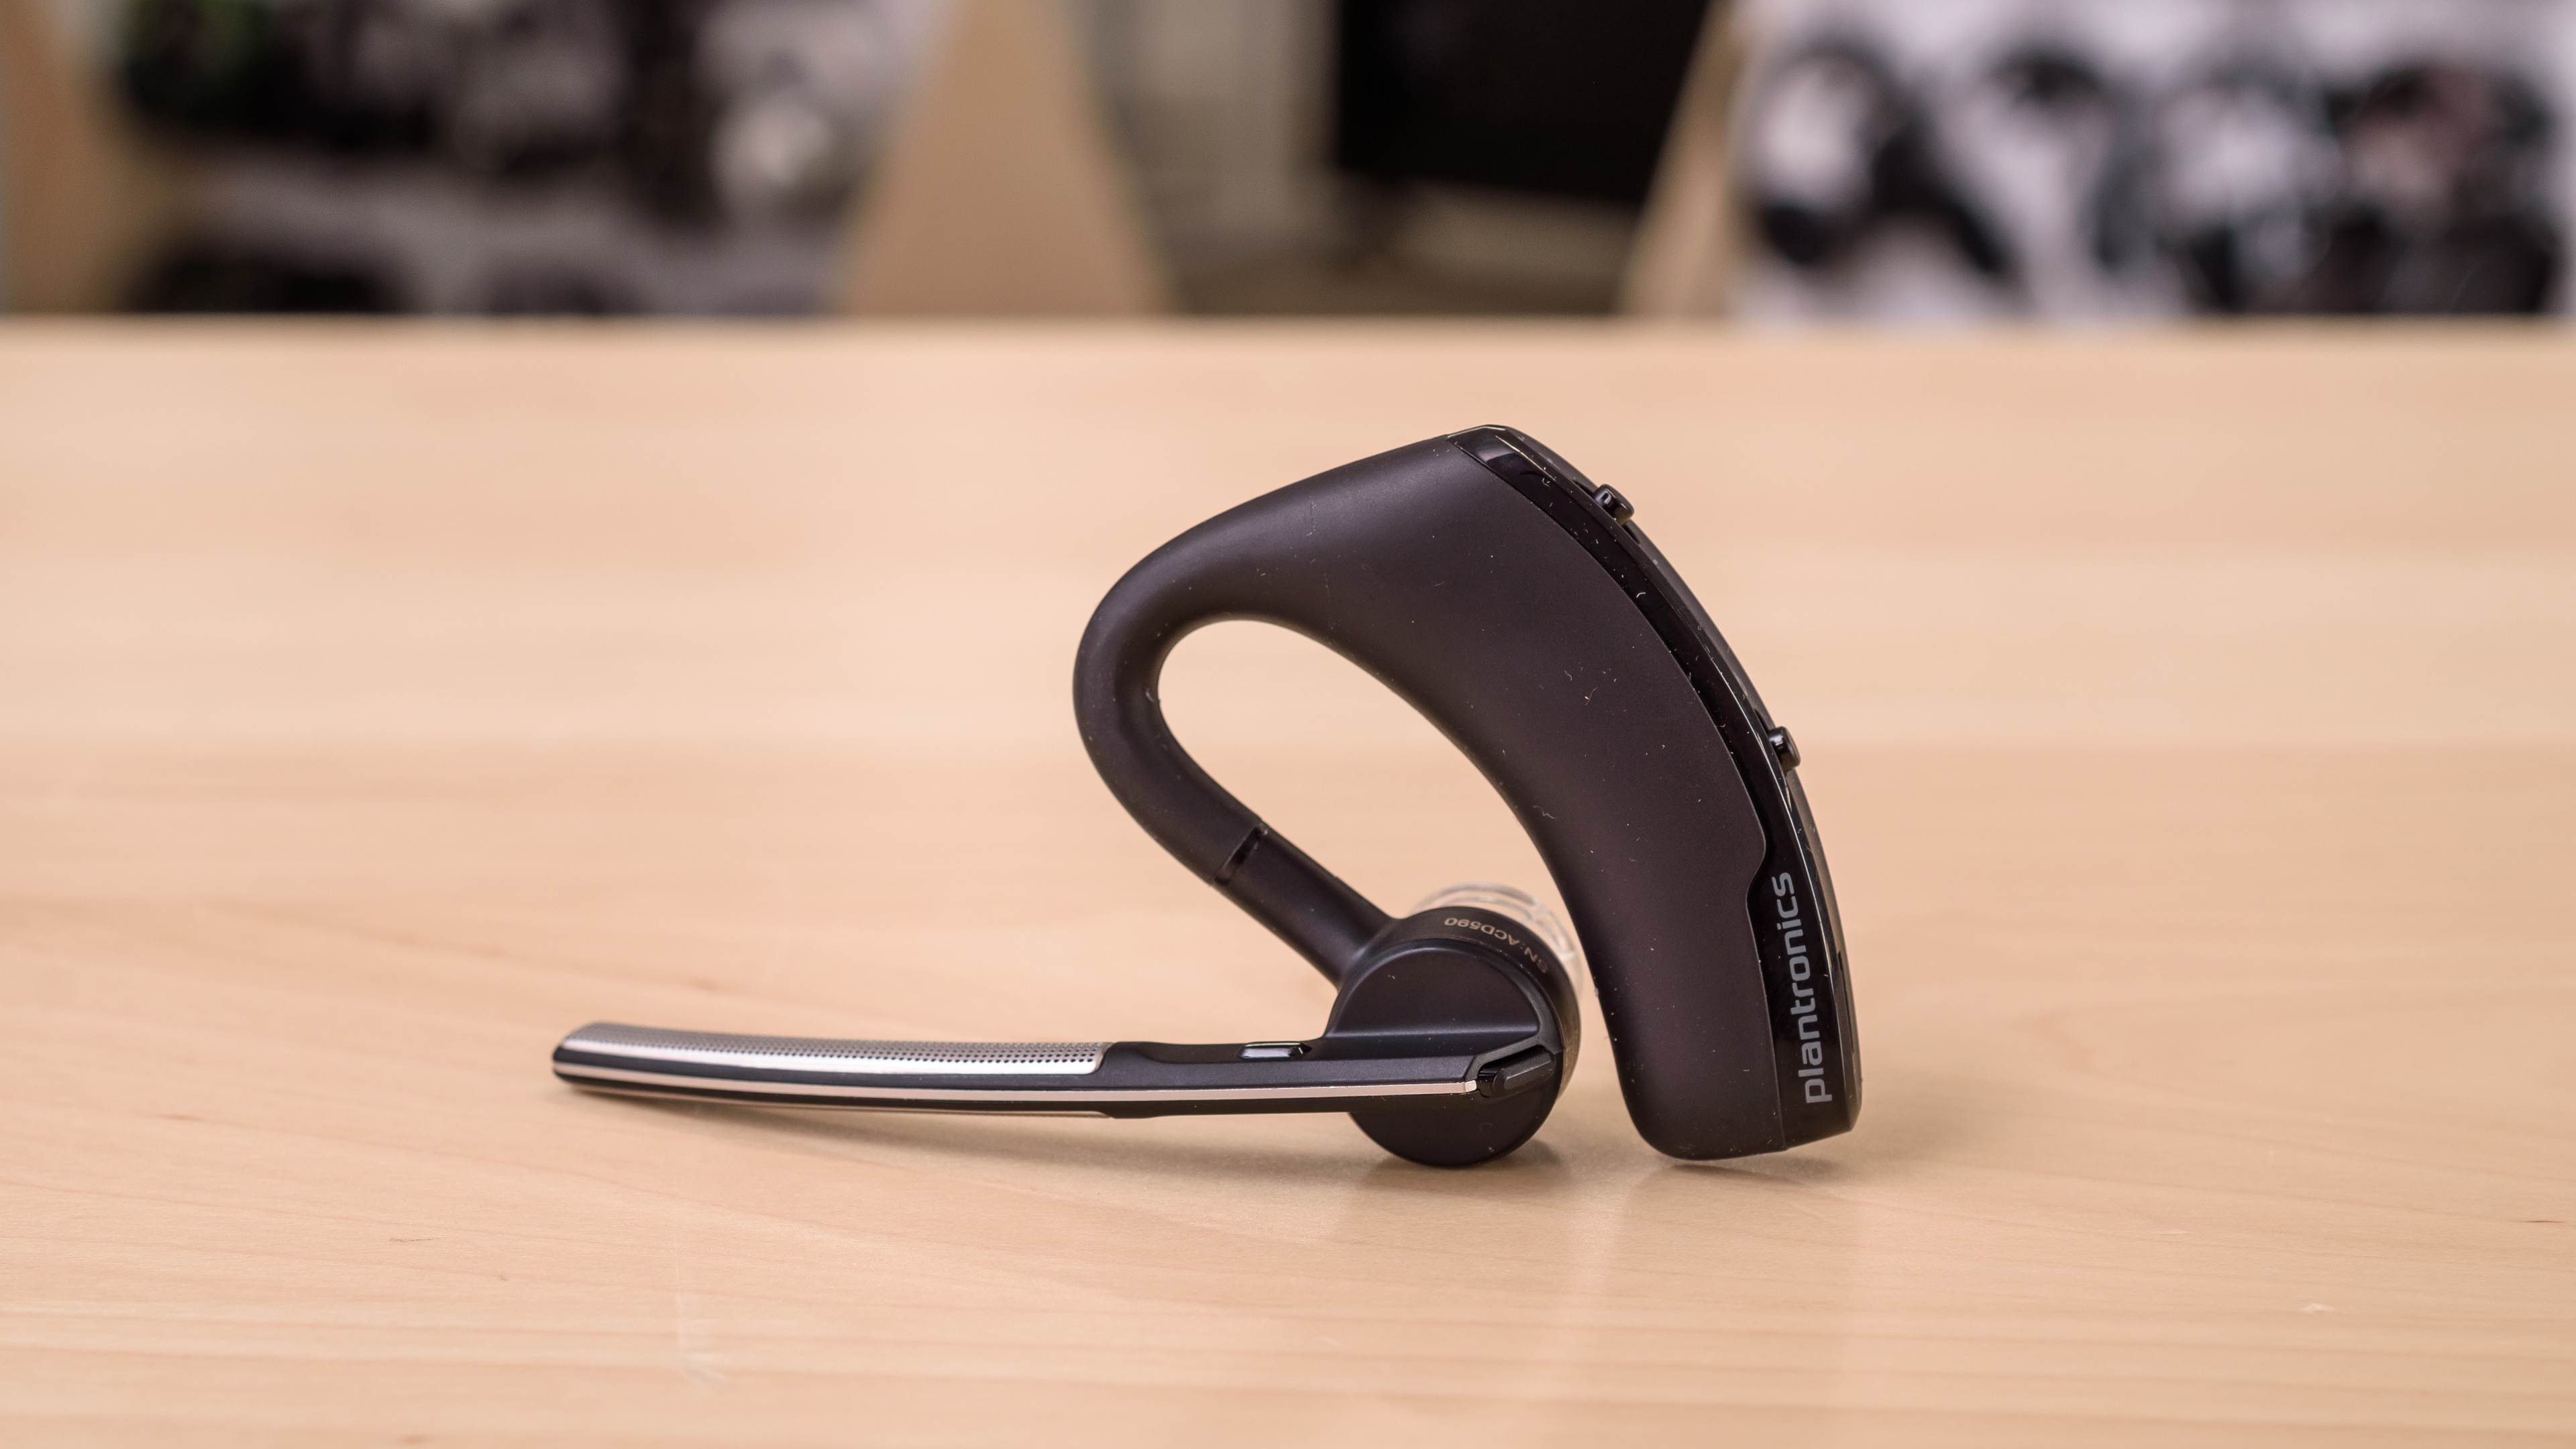 Plantronics Headset Sync: Connecting To Your IPhone